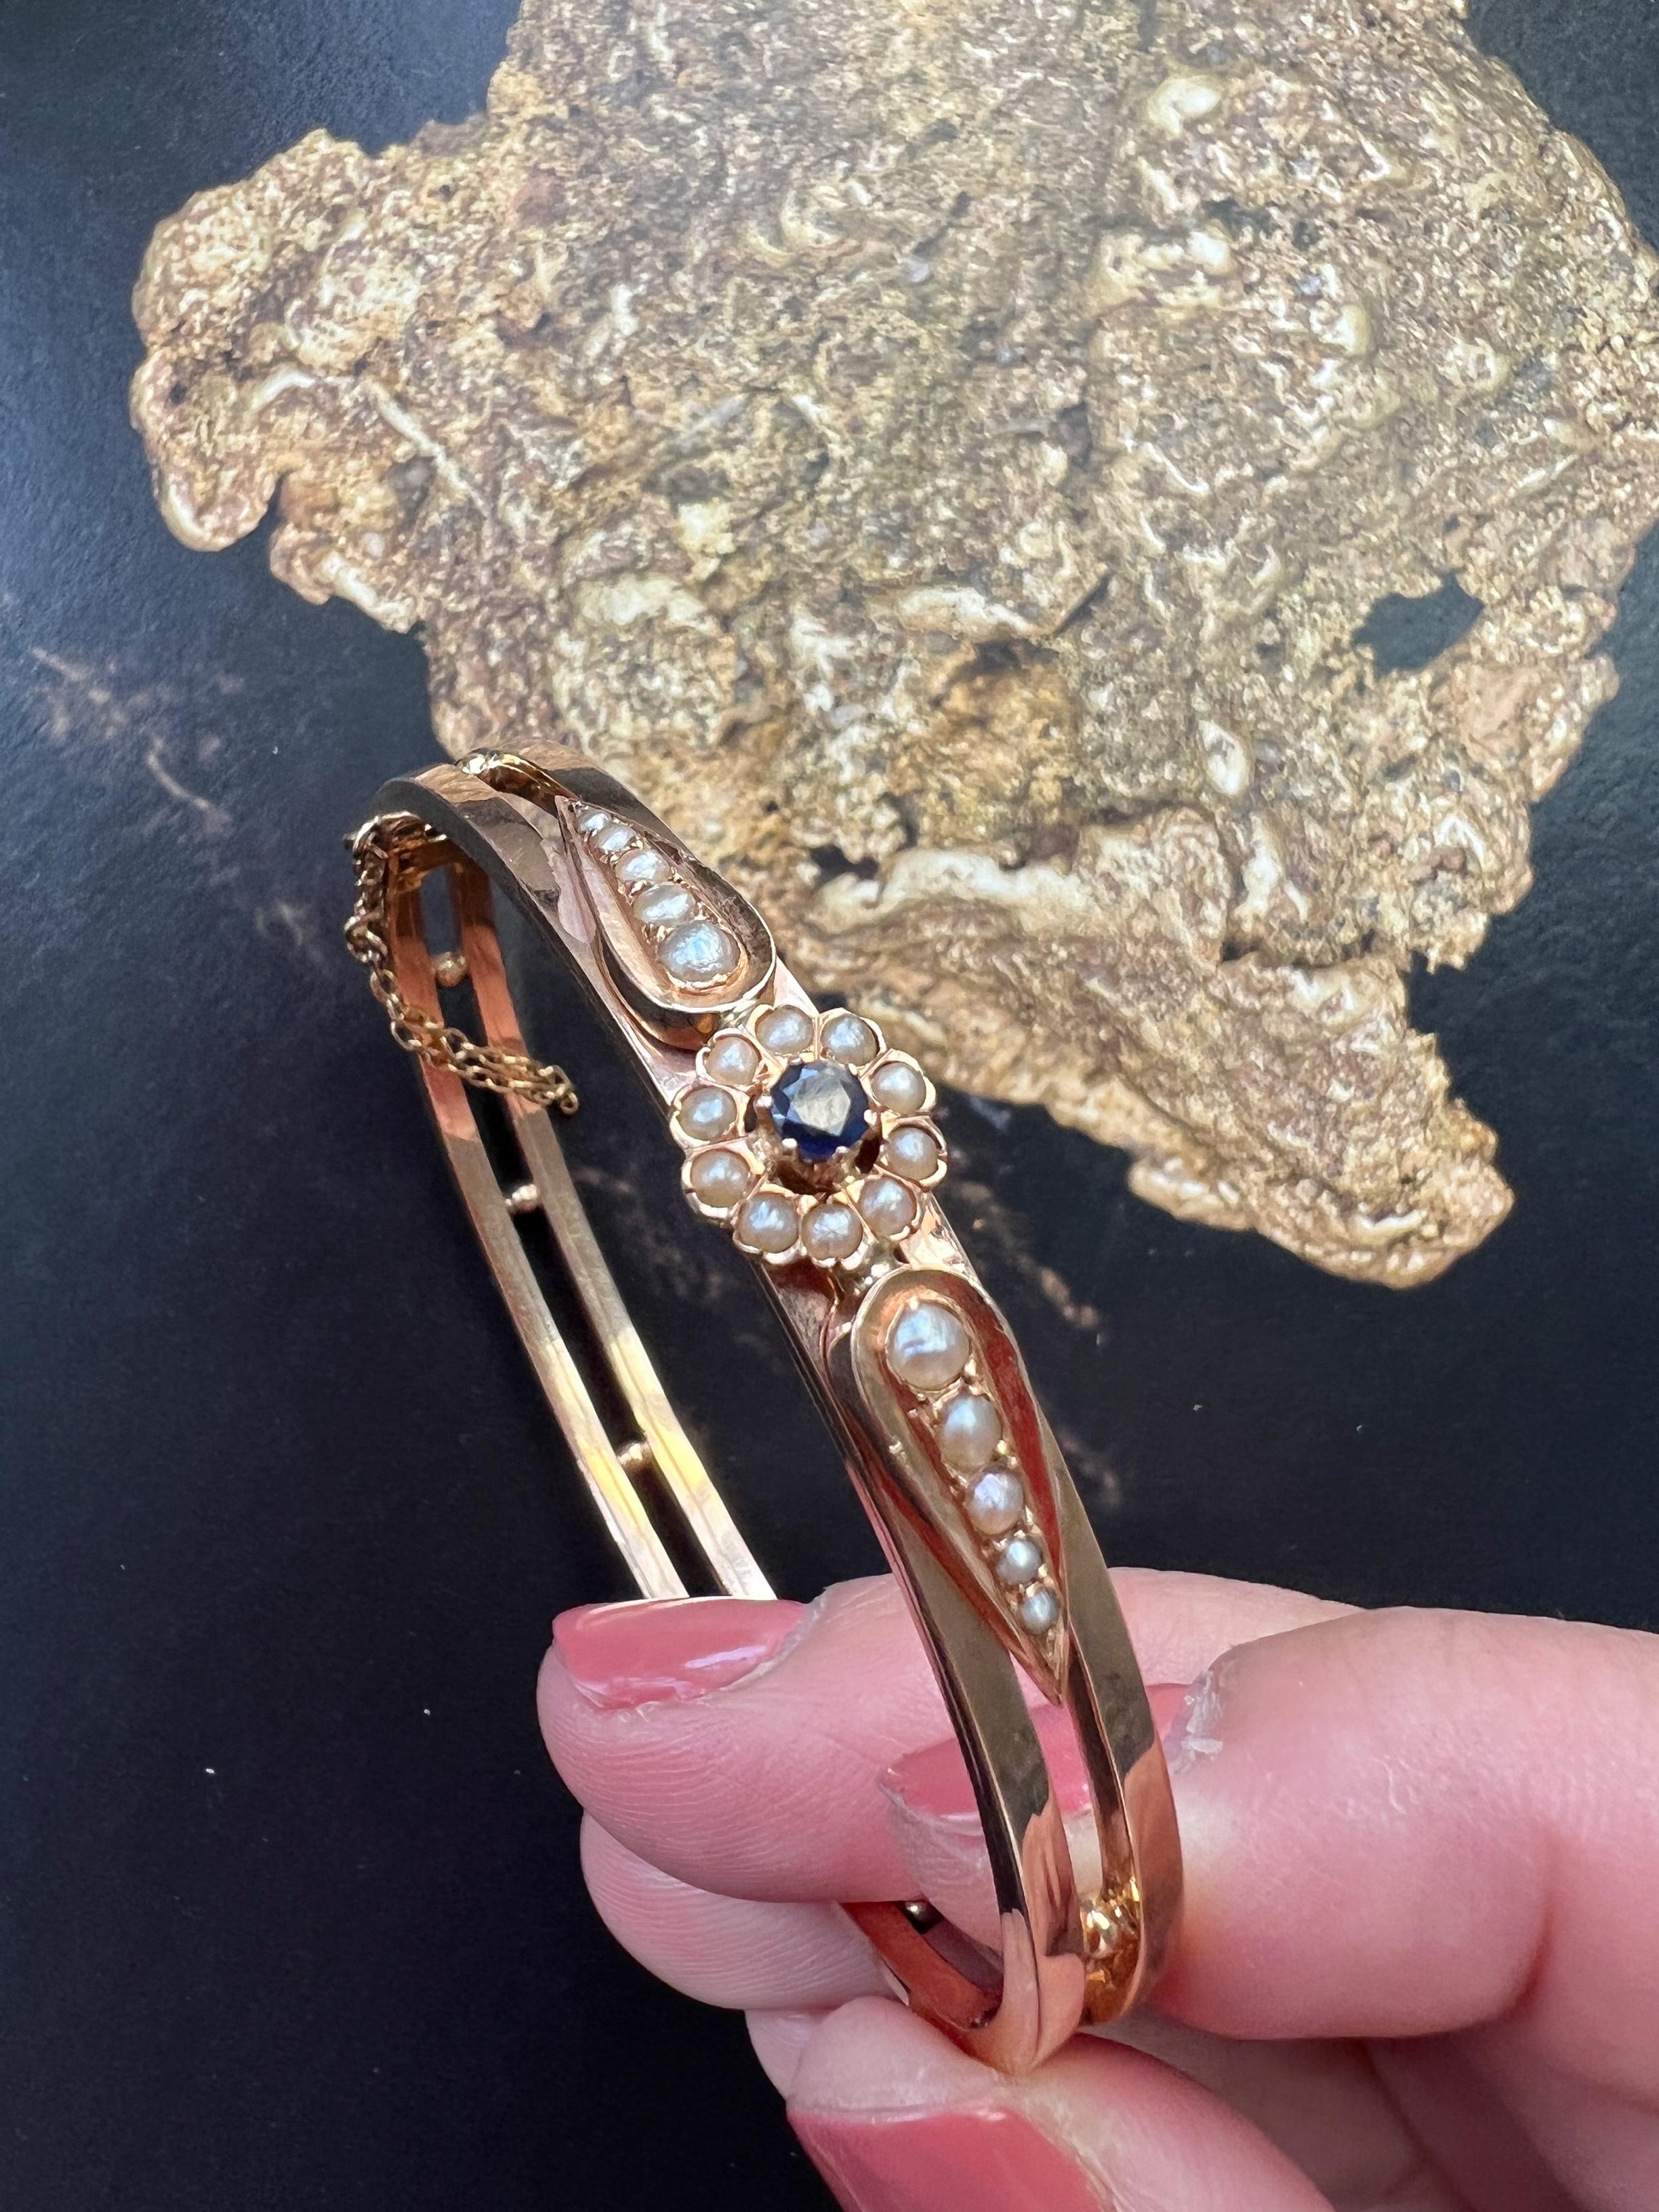 Deceptively simple yet undeniably elegant and feminine, this beautiful Victorian era 18K yellow gold bracelet captured our attention the first time we saw it.

The bracelet features a flower motif in the center, made of a blue sapphire surrounded by